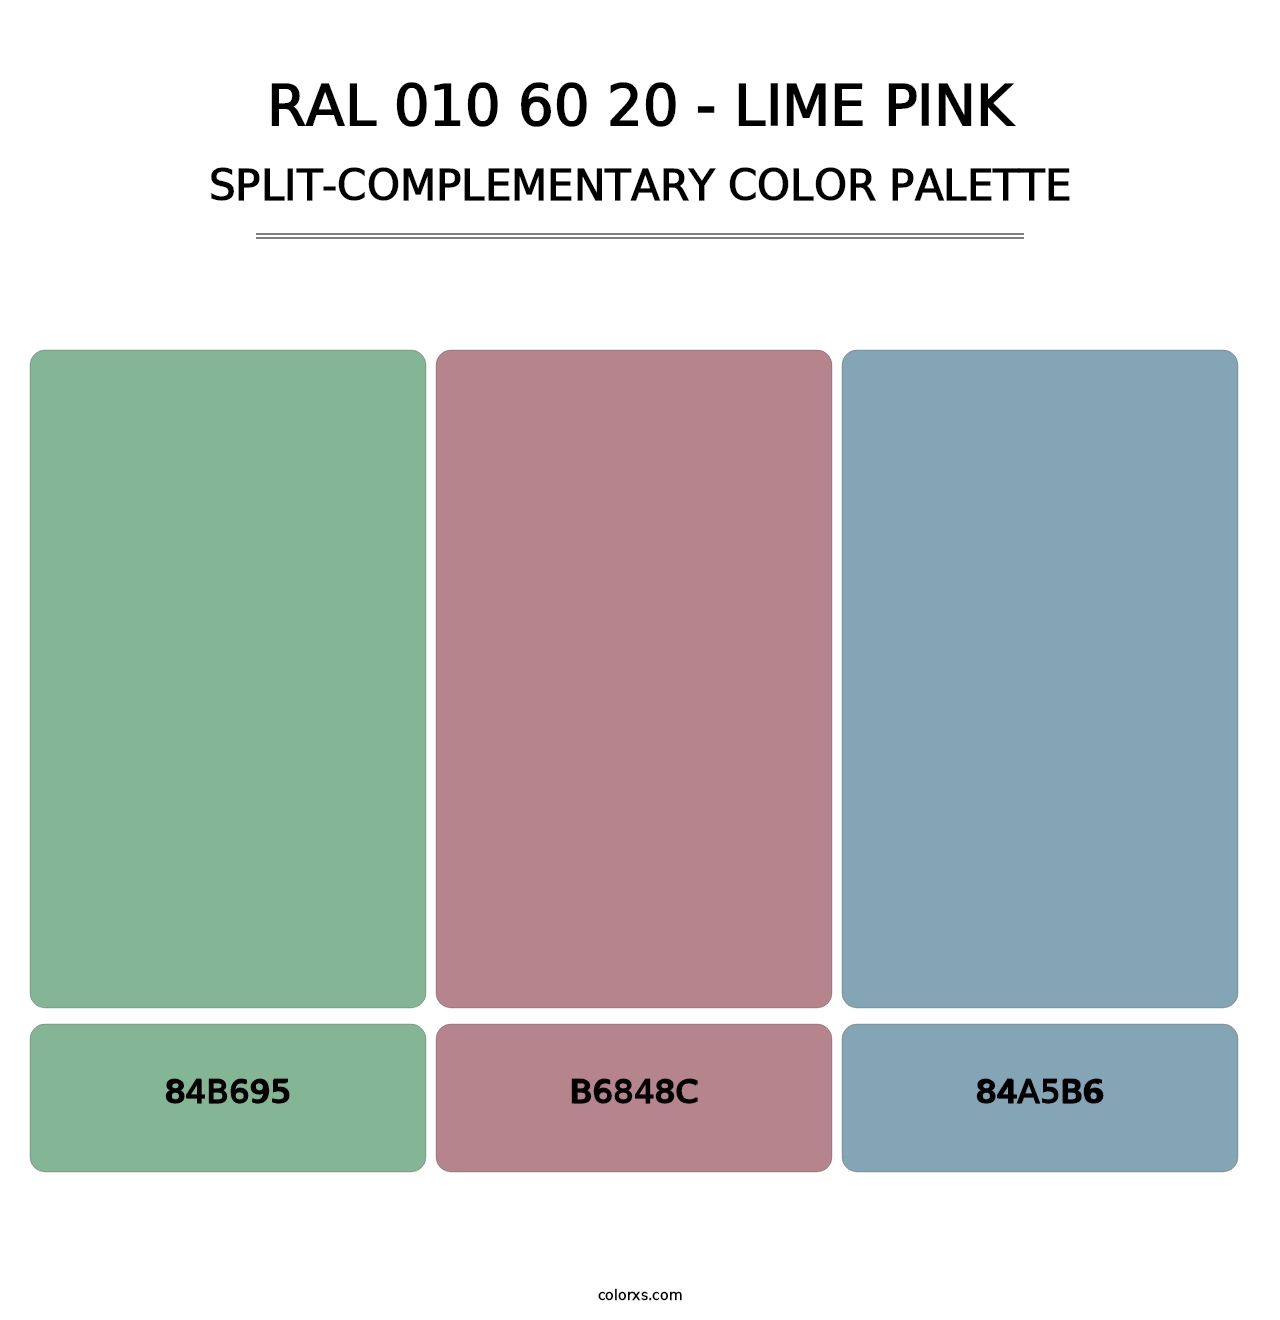 RAL 010 60 20 - Lime Pink - Split-Complementary Color Palette